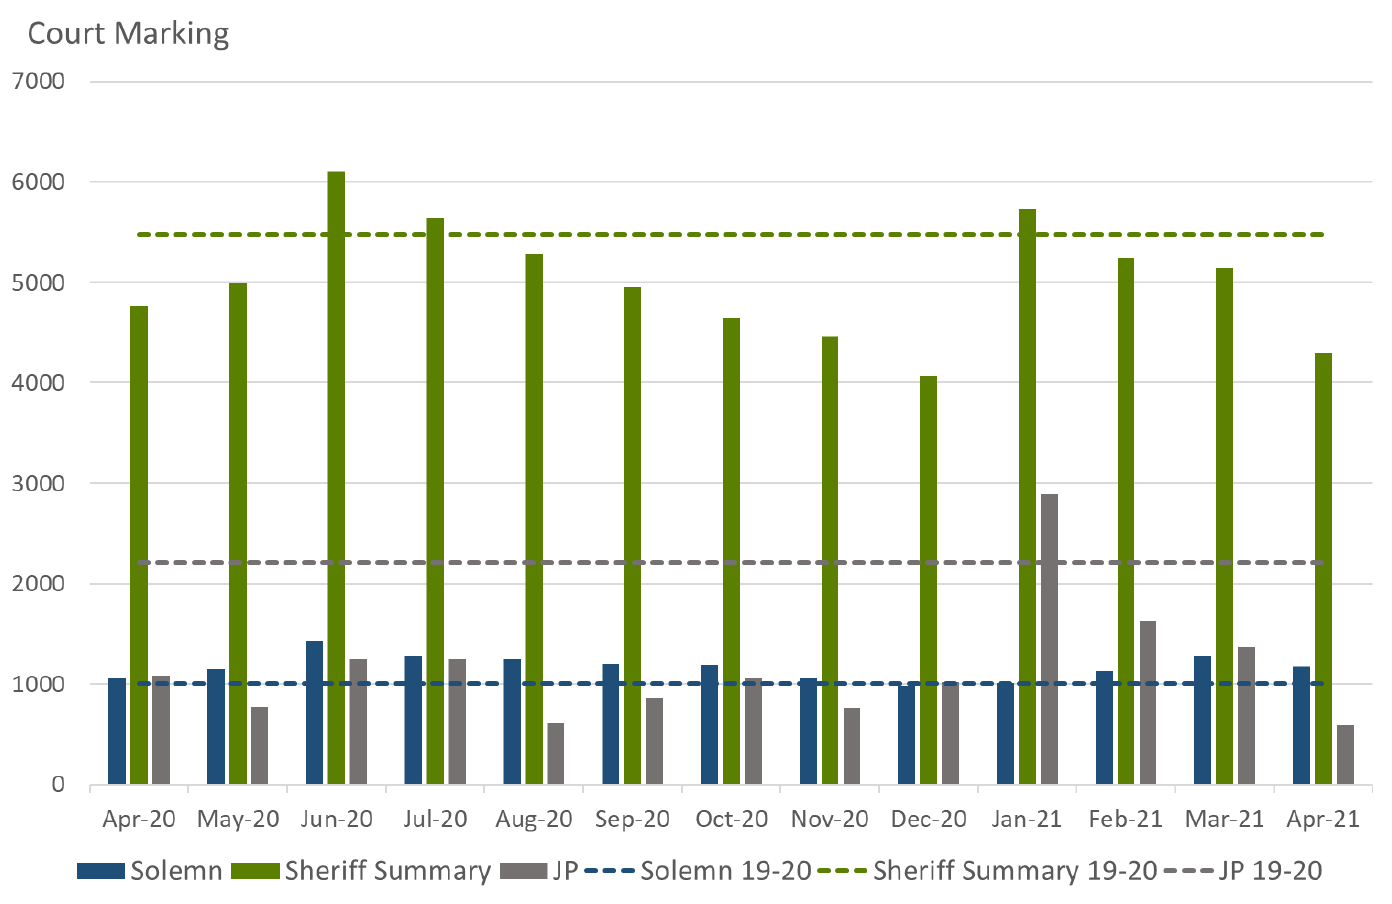 Bar graph showing the number of subjects marked for different court proceedings by month.